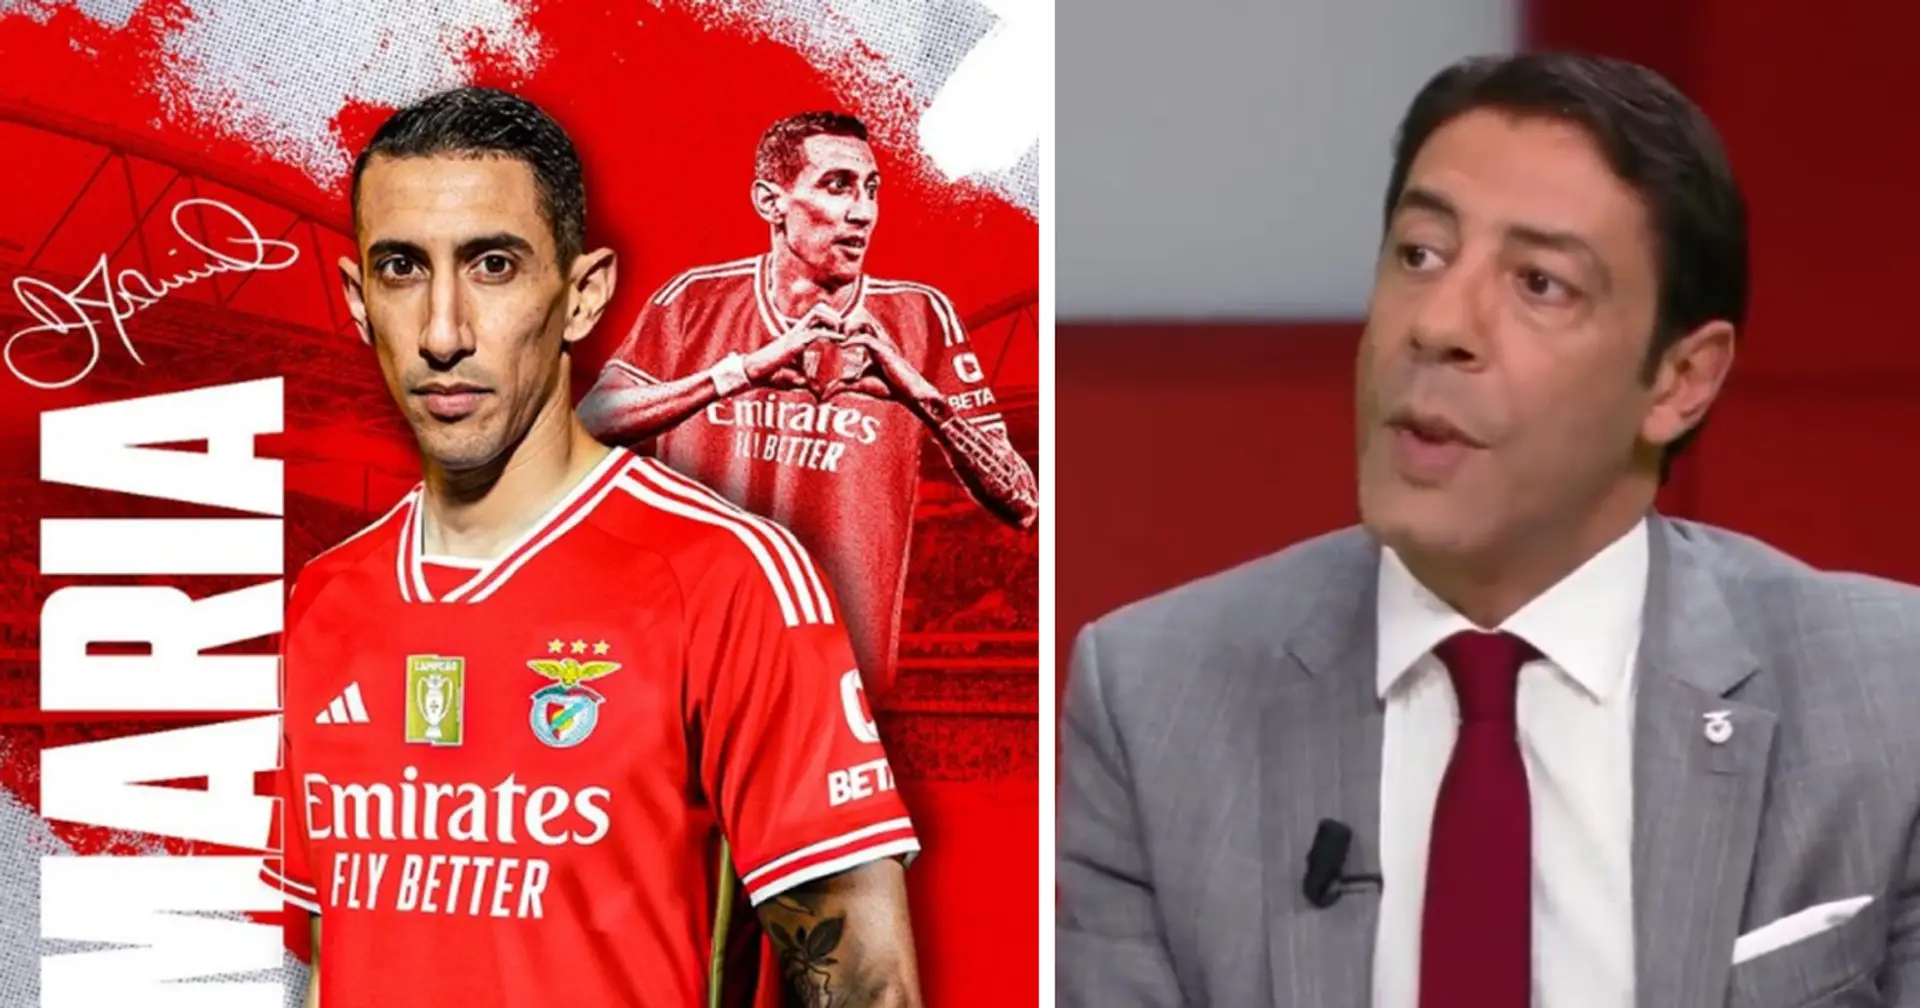 'He did not want to know what his salary would be': Rui Costa revealed details of the negotiation with Di Maria